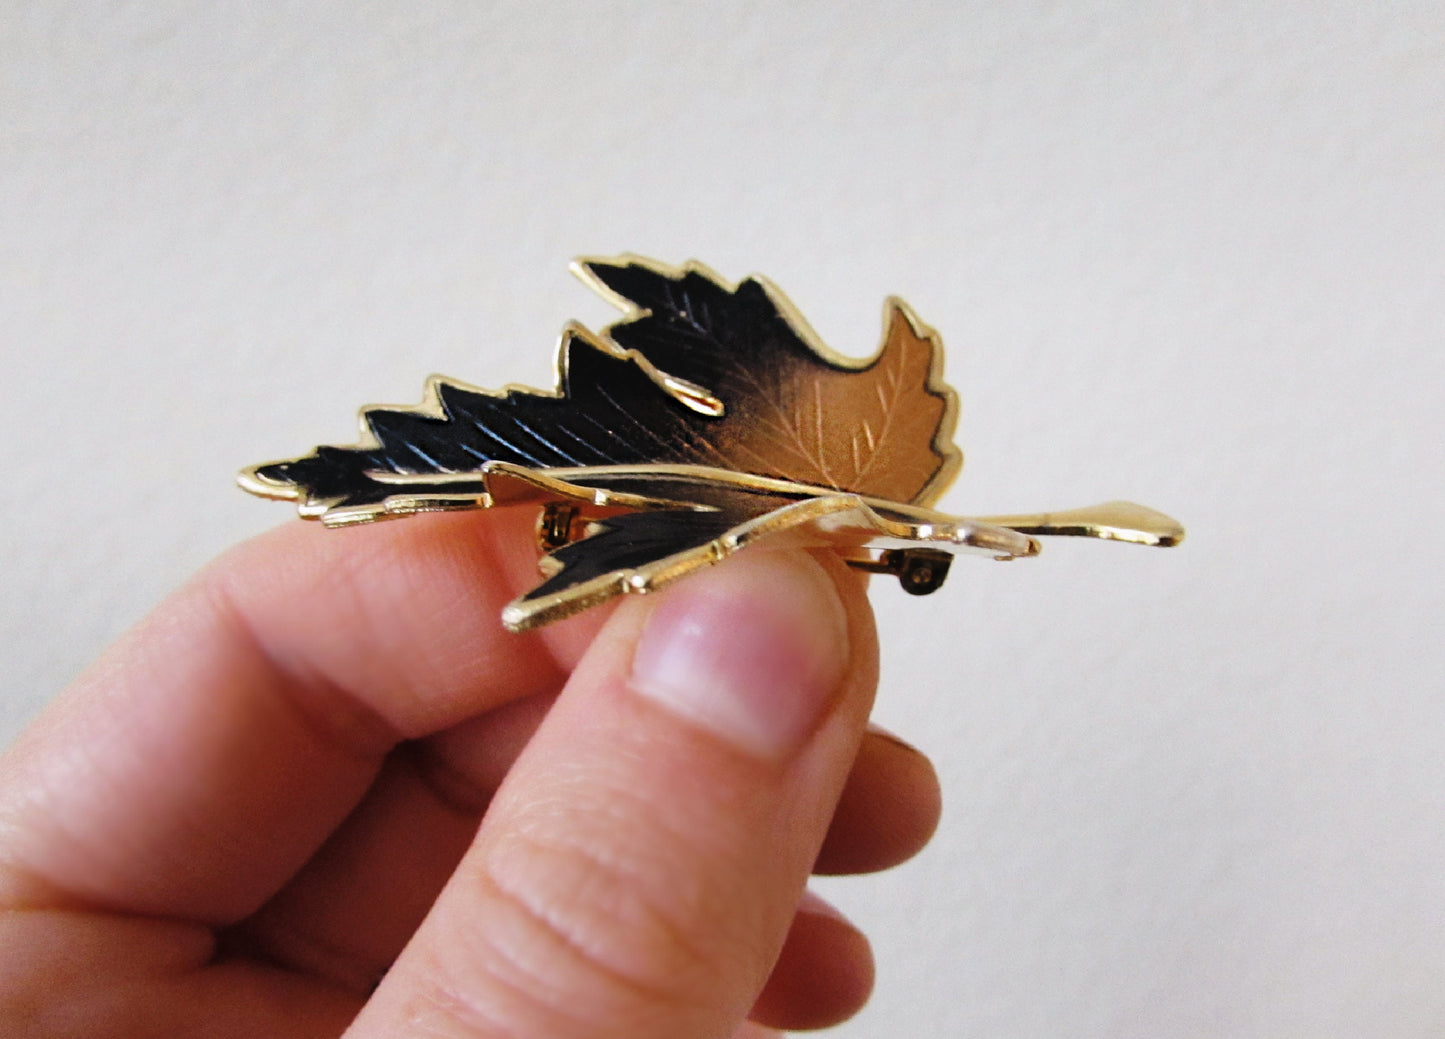 Vintage Leaf Brooch, 80's Small Autumn Pin, Retro Brooch, Vintage Fall Fashion, Gold and Bronzed Brown Leaf Pin, Rustic Woodland Brooch Pin